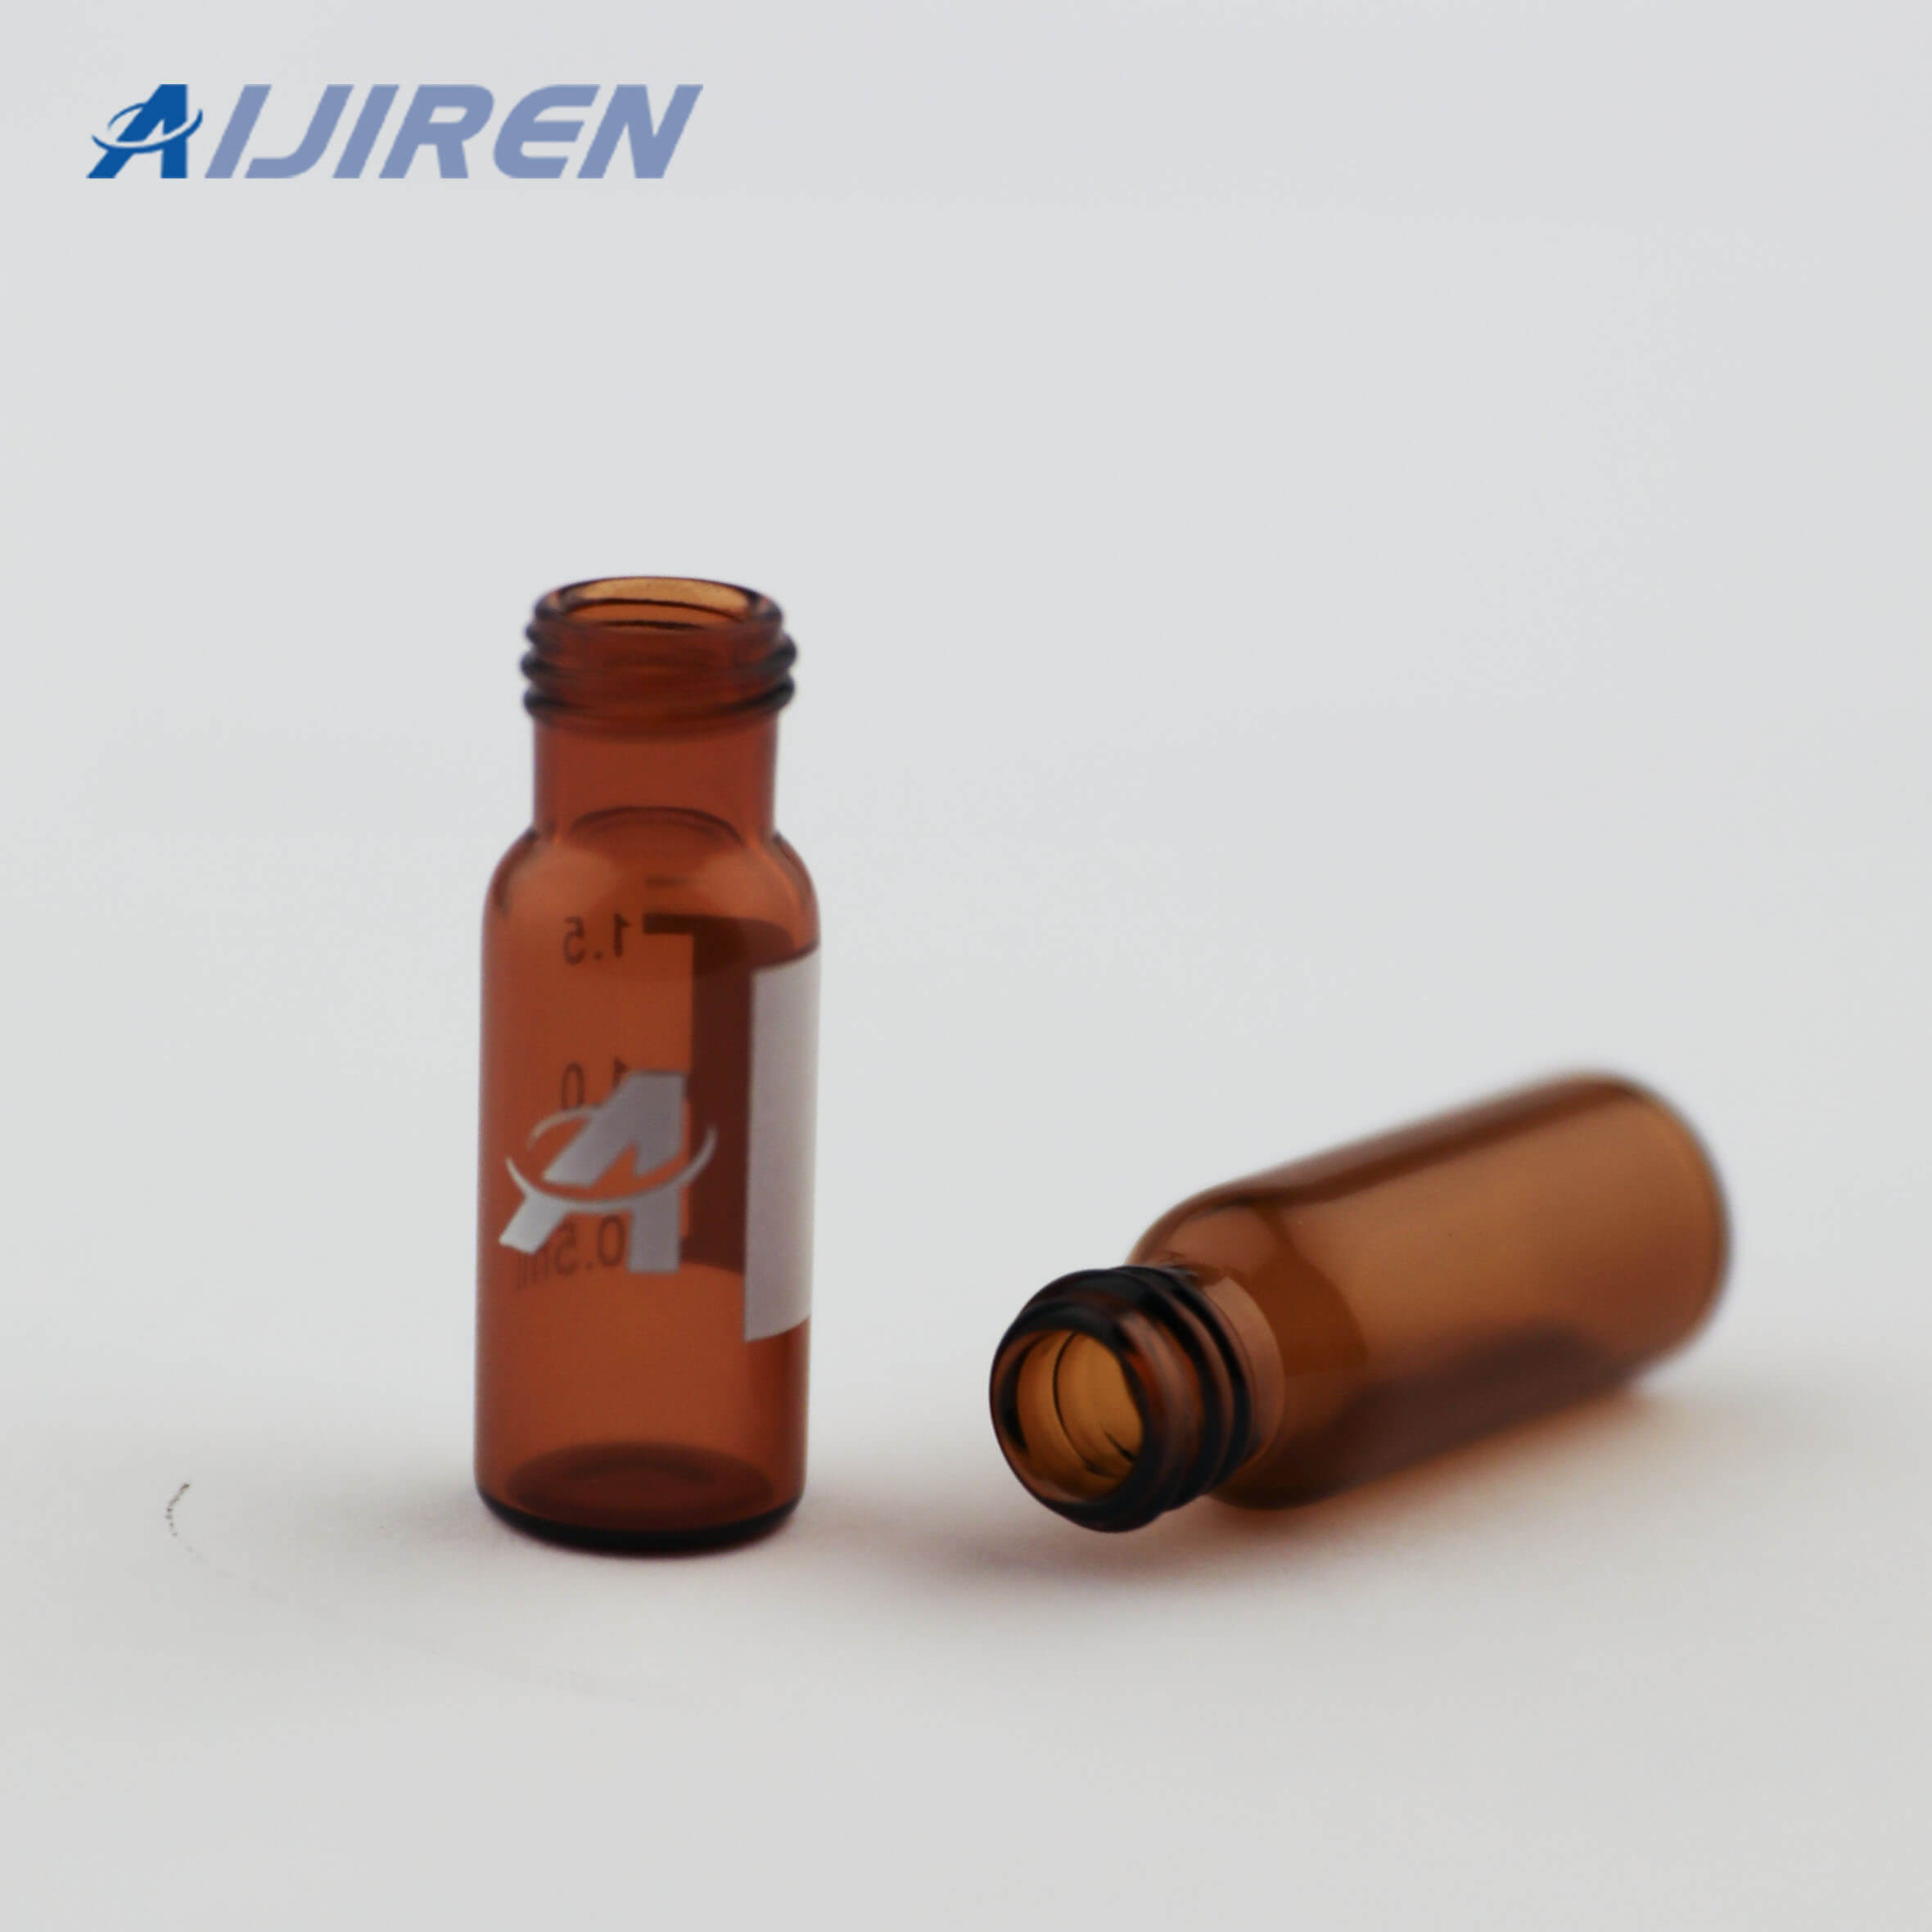 Aijiren 9mm HPLC Vial in Amber Glass for THERMO FISHER